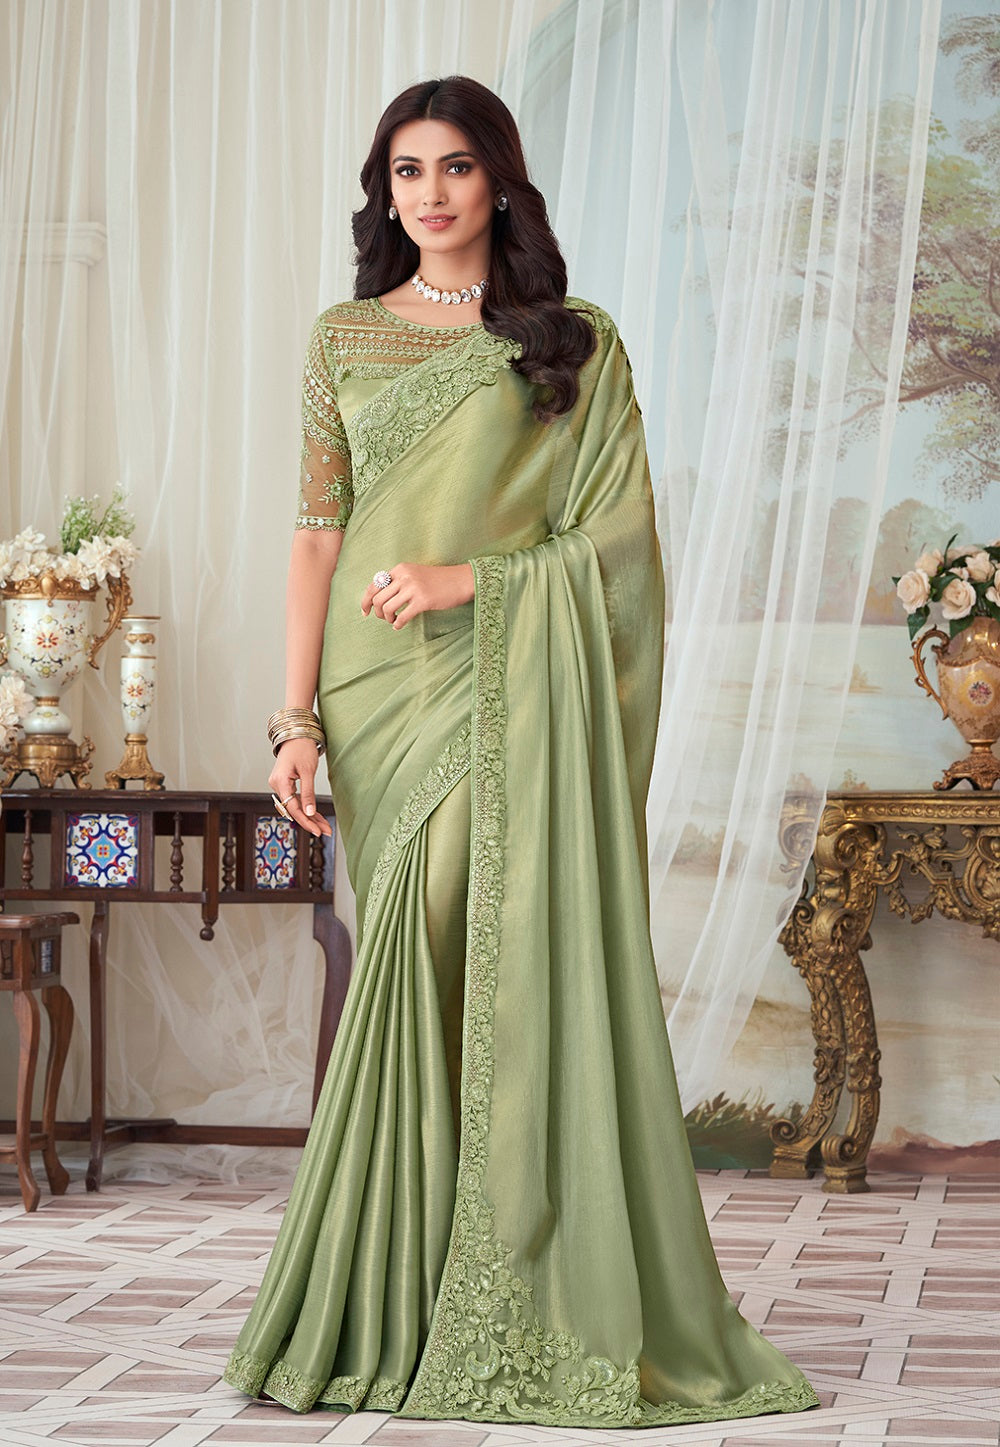 Shimmer Georgette Embroidered Saree in Light Green